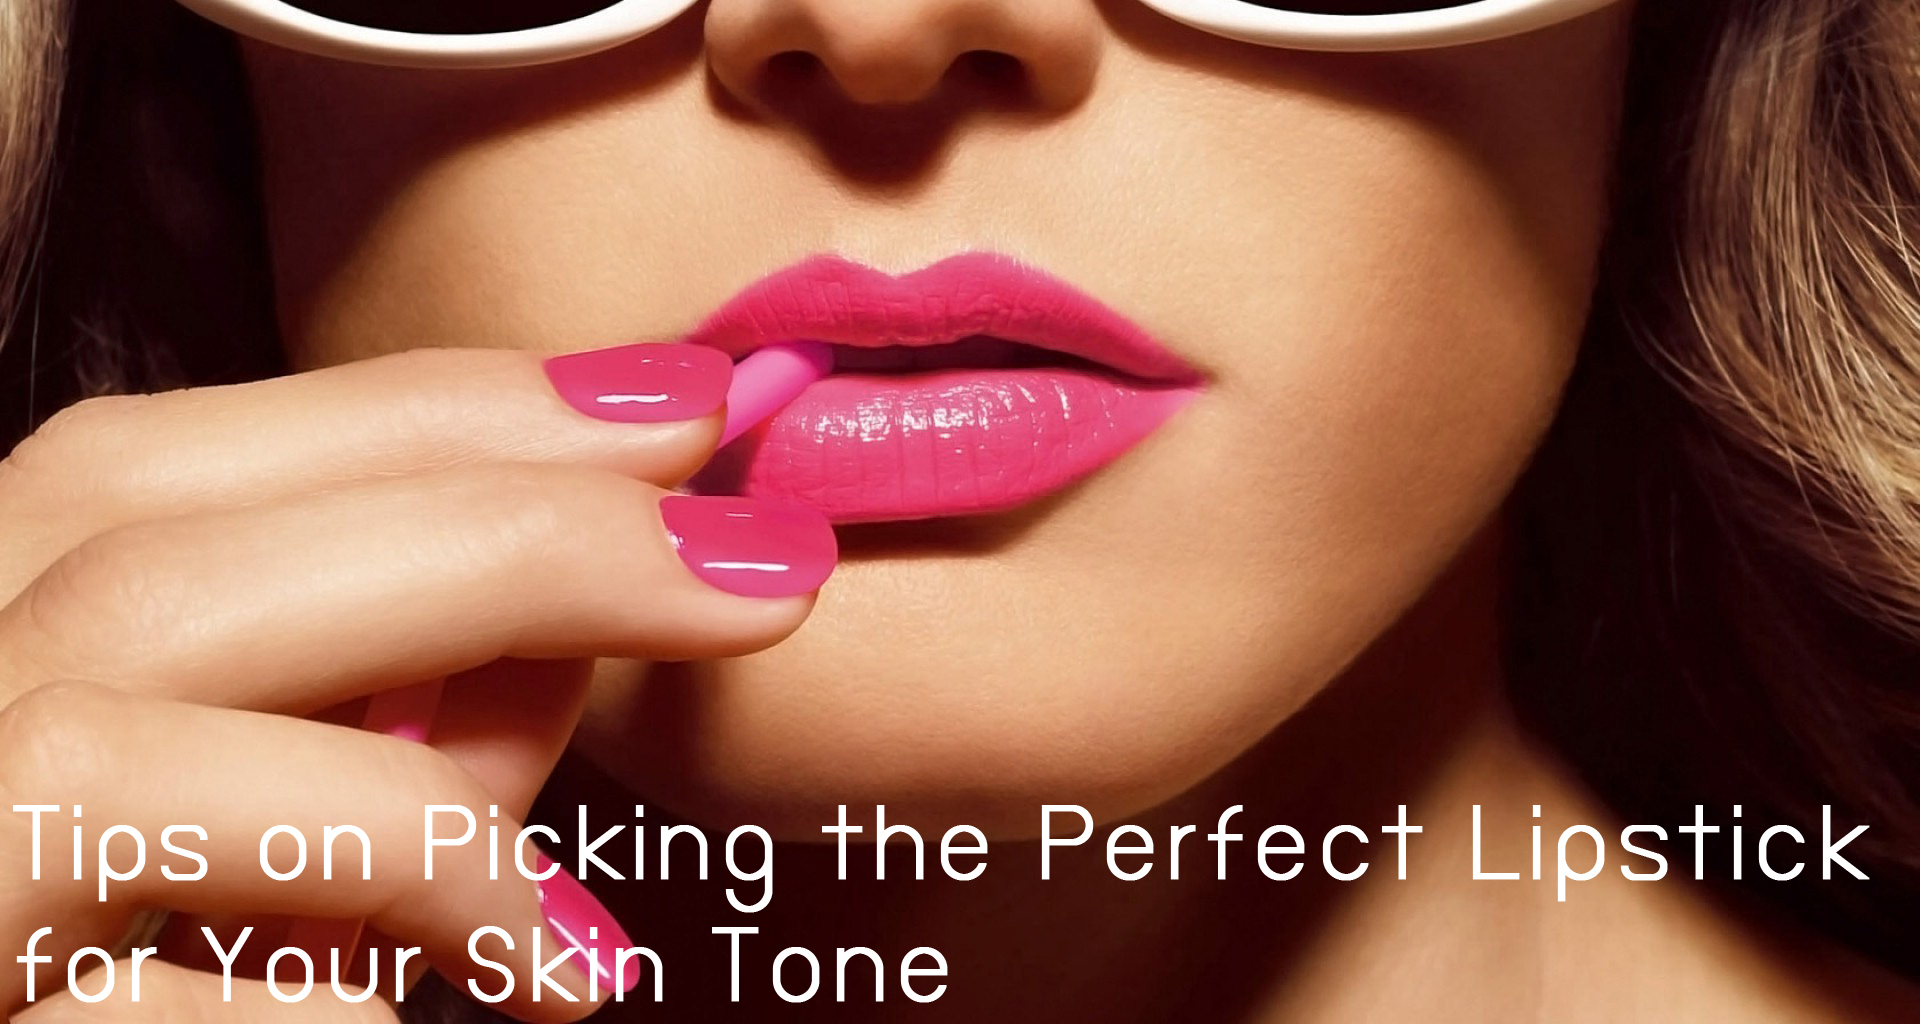 Tips on Picking the Perfect Lipstick for Your Skin ToneHead